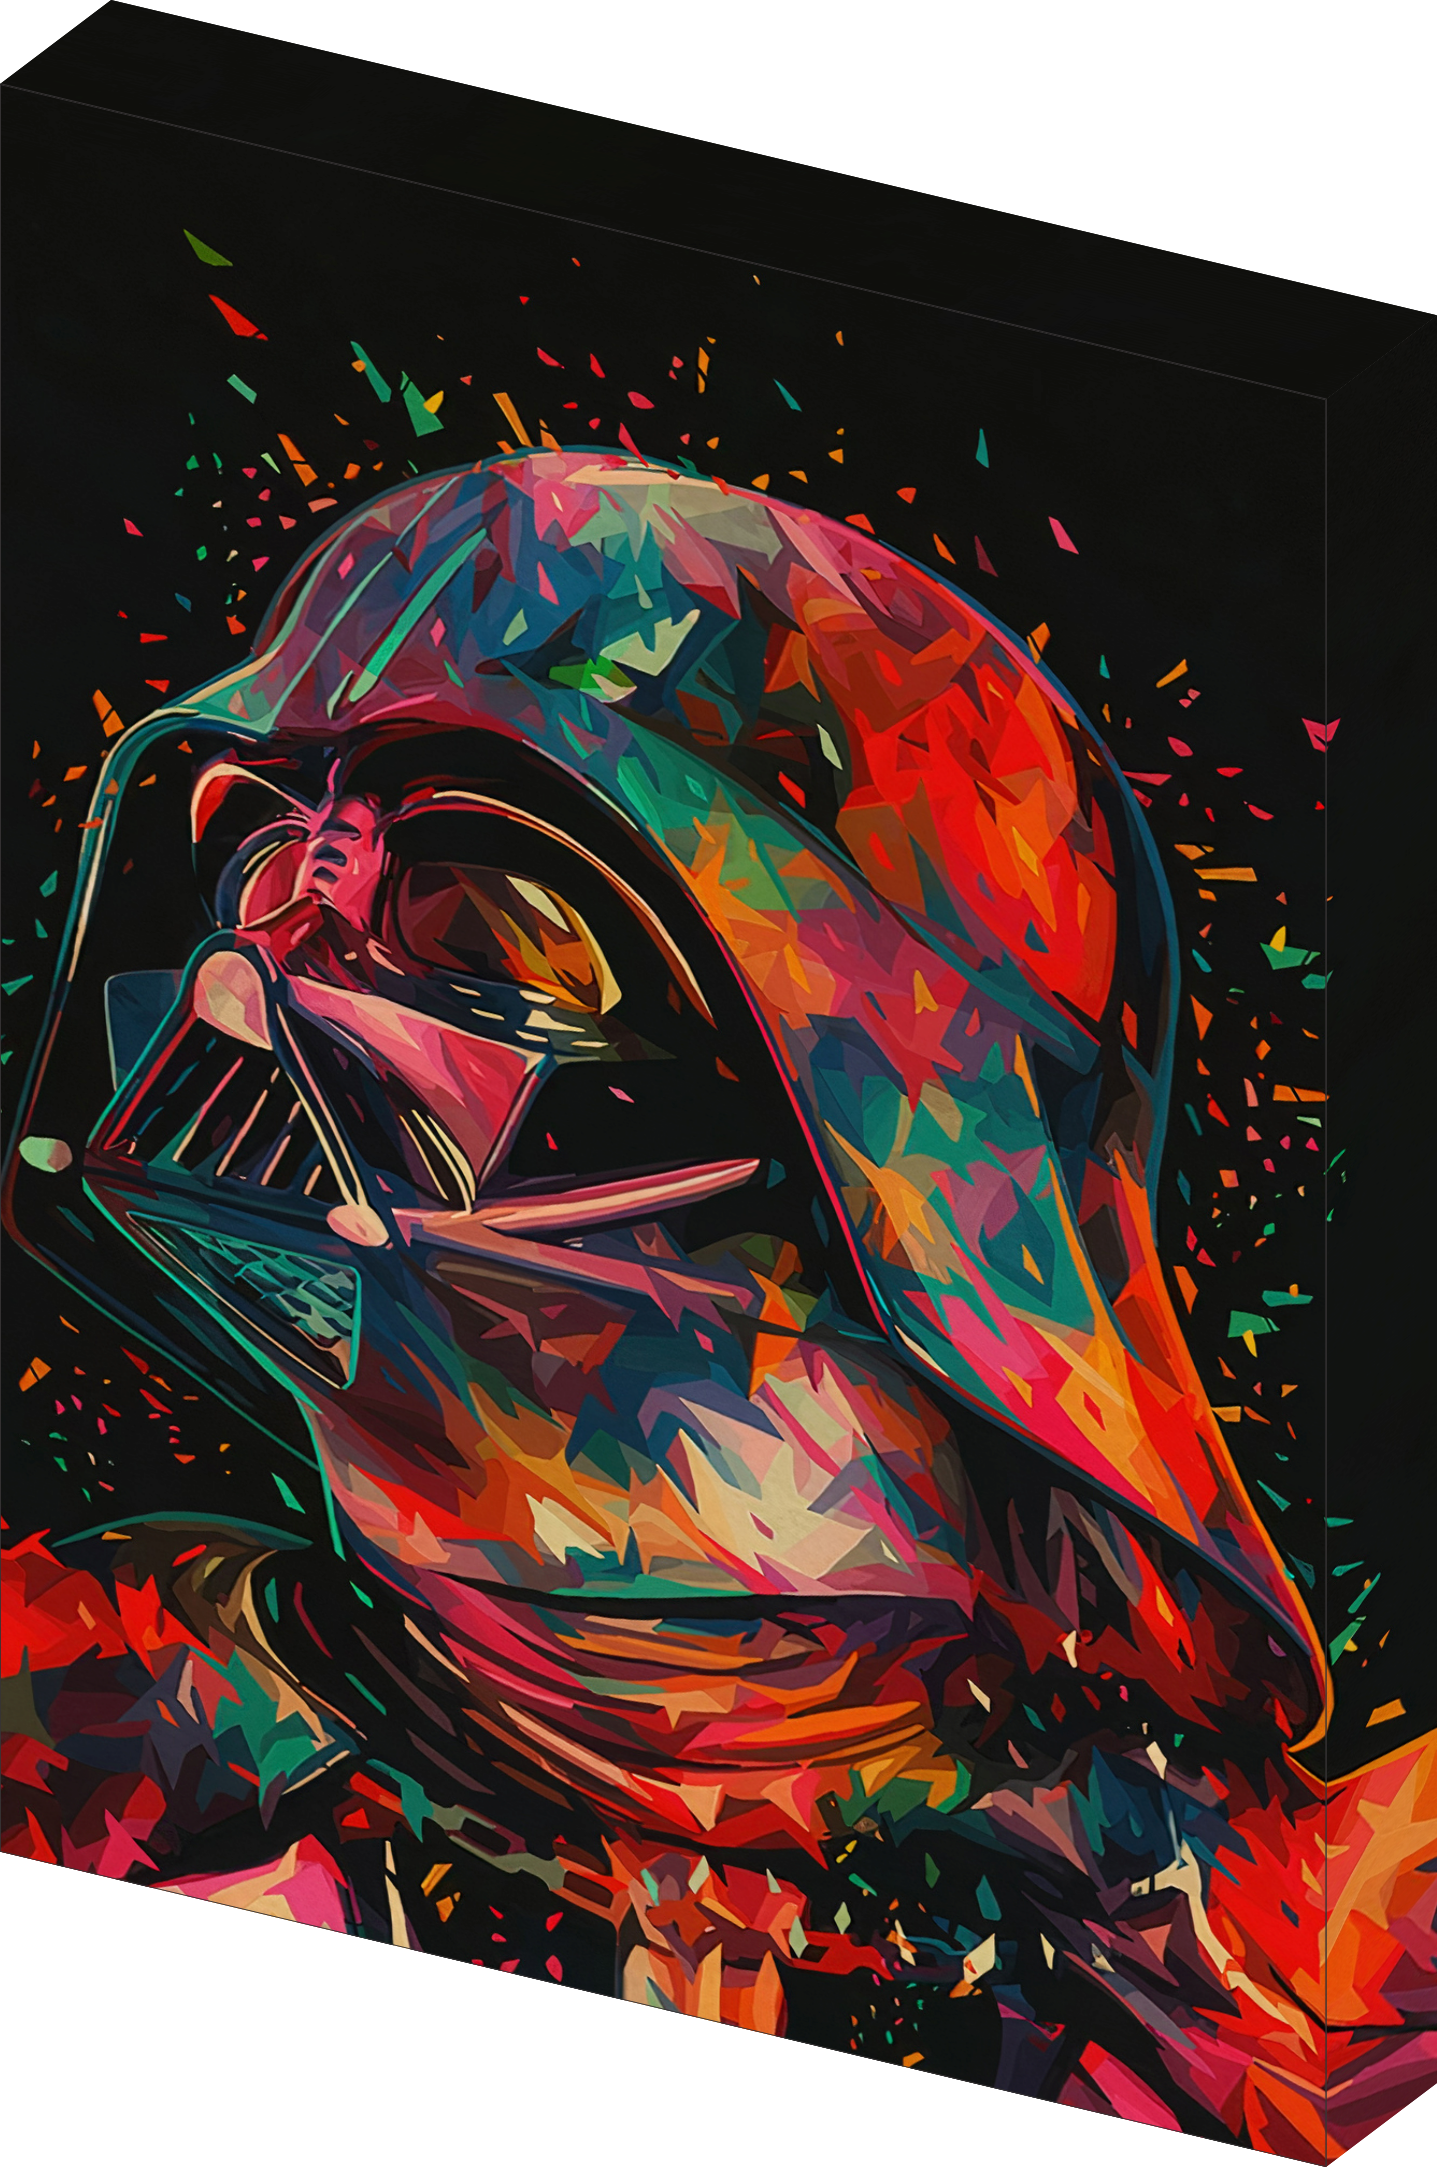 Darth Vader Star Wars Paint by Numbers